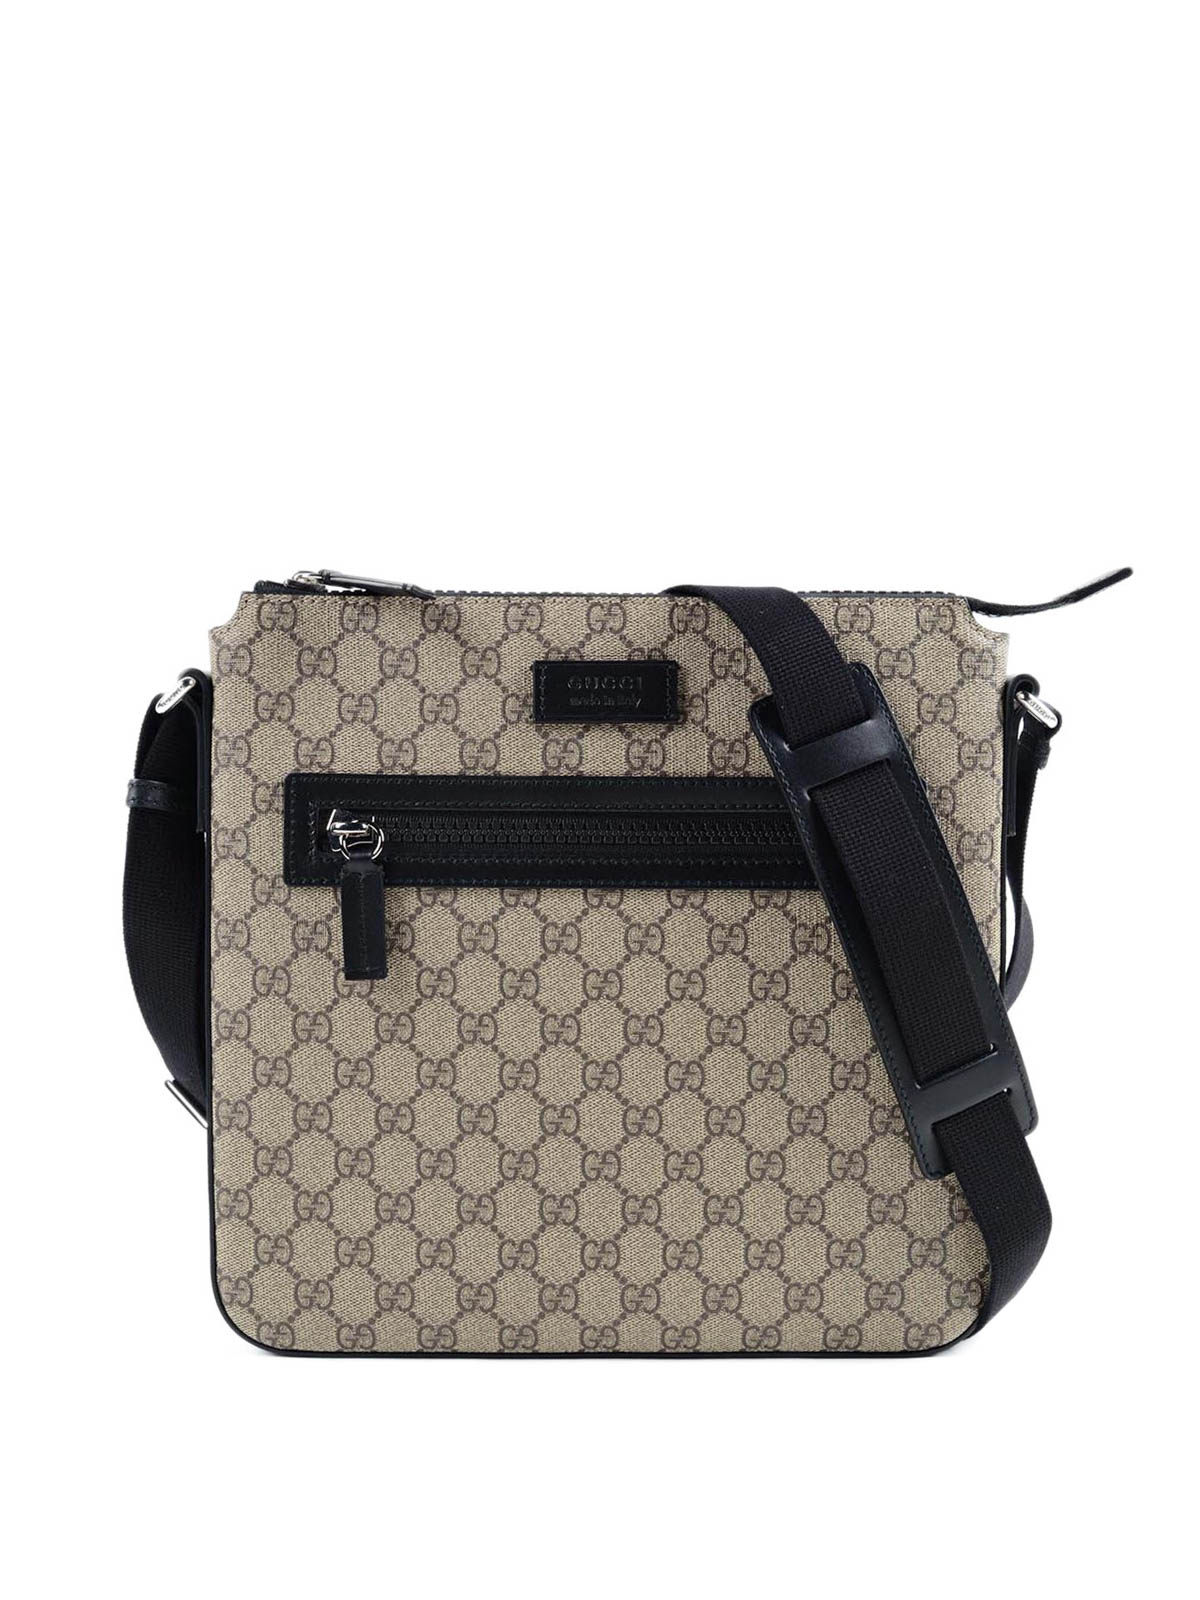 GG Supreme crossbody by Gucci - cross body bags | Shop online at www.cinemas93.org